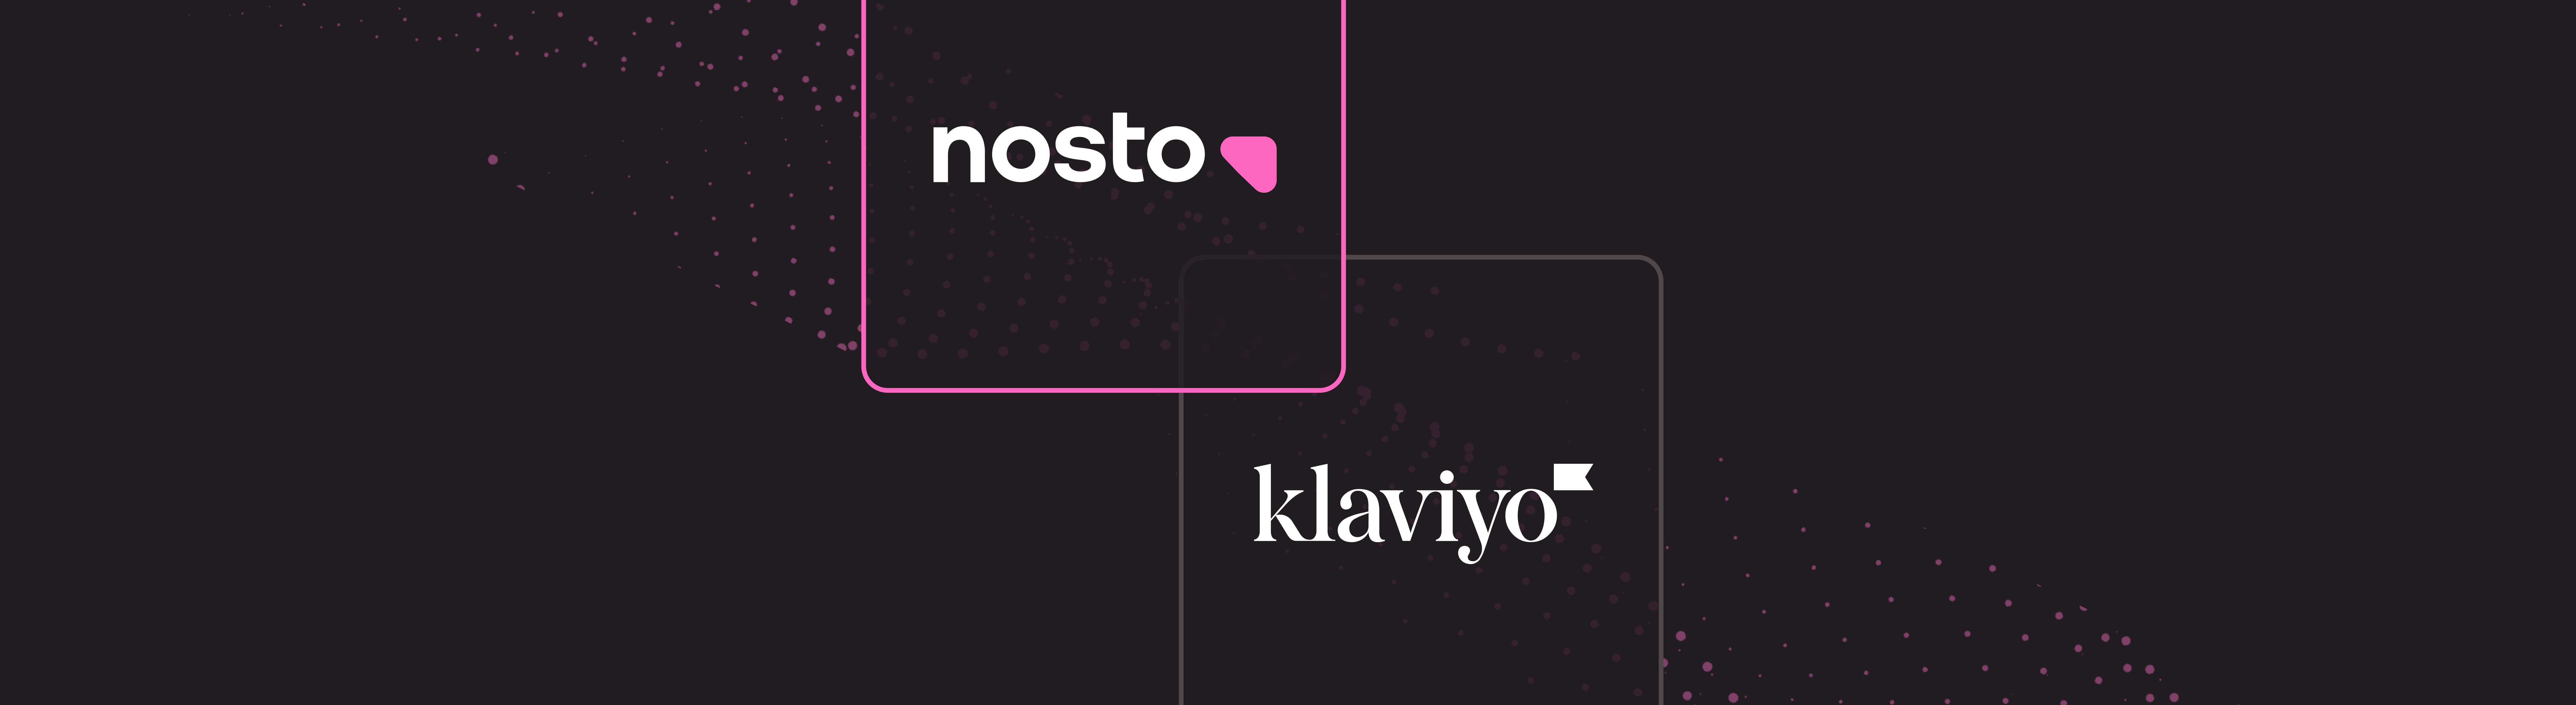 Nosto launches new Klaviyo integration to help online retailers scale hyper-personalized, cross-channel shopping experiences